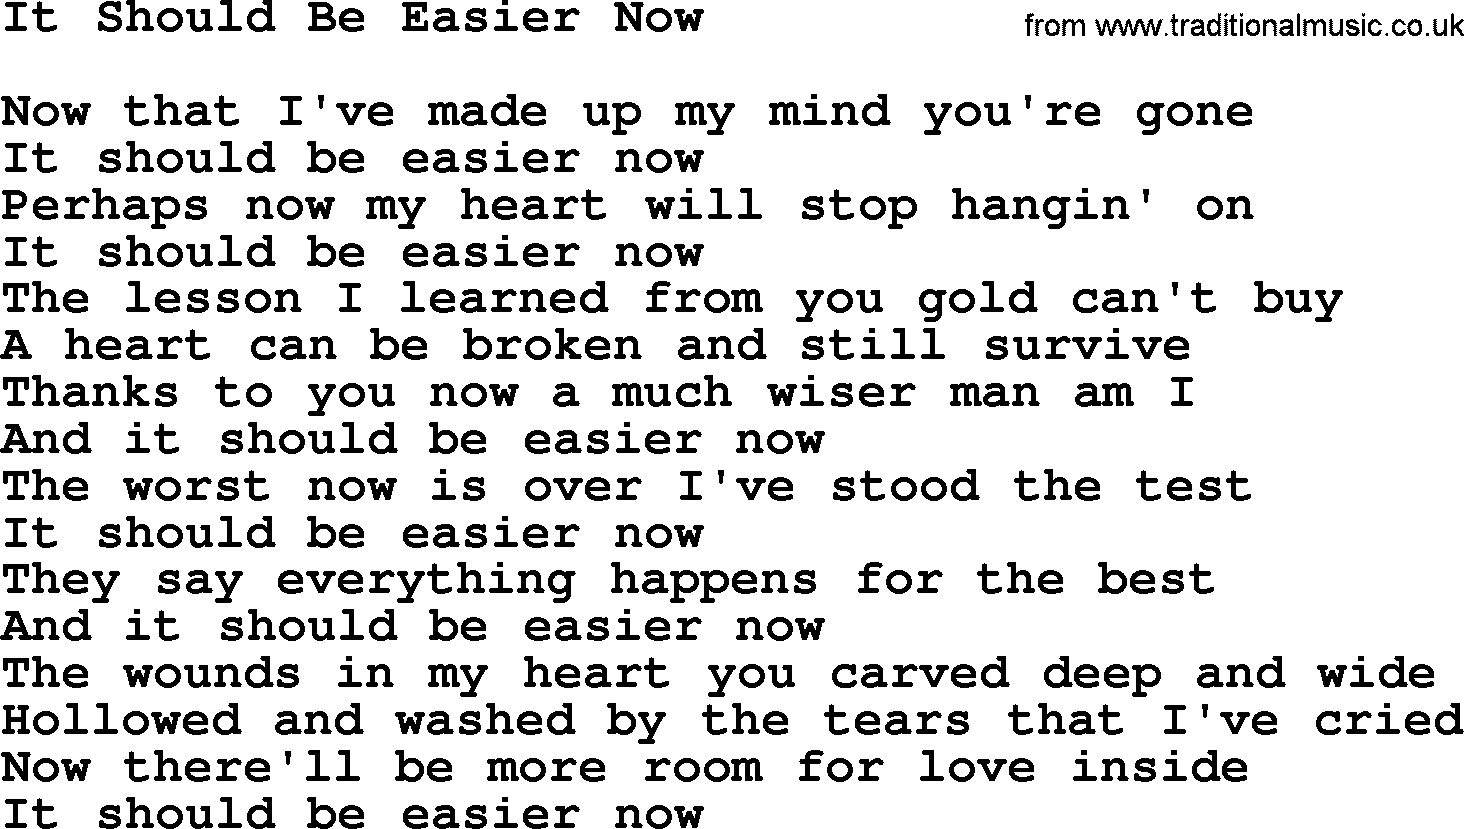 Willie Nelson song: It Should Be Easier Now lyrics